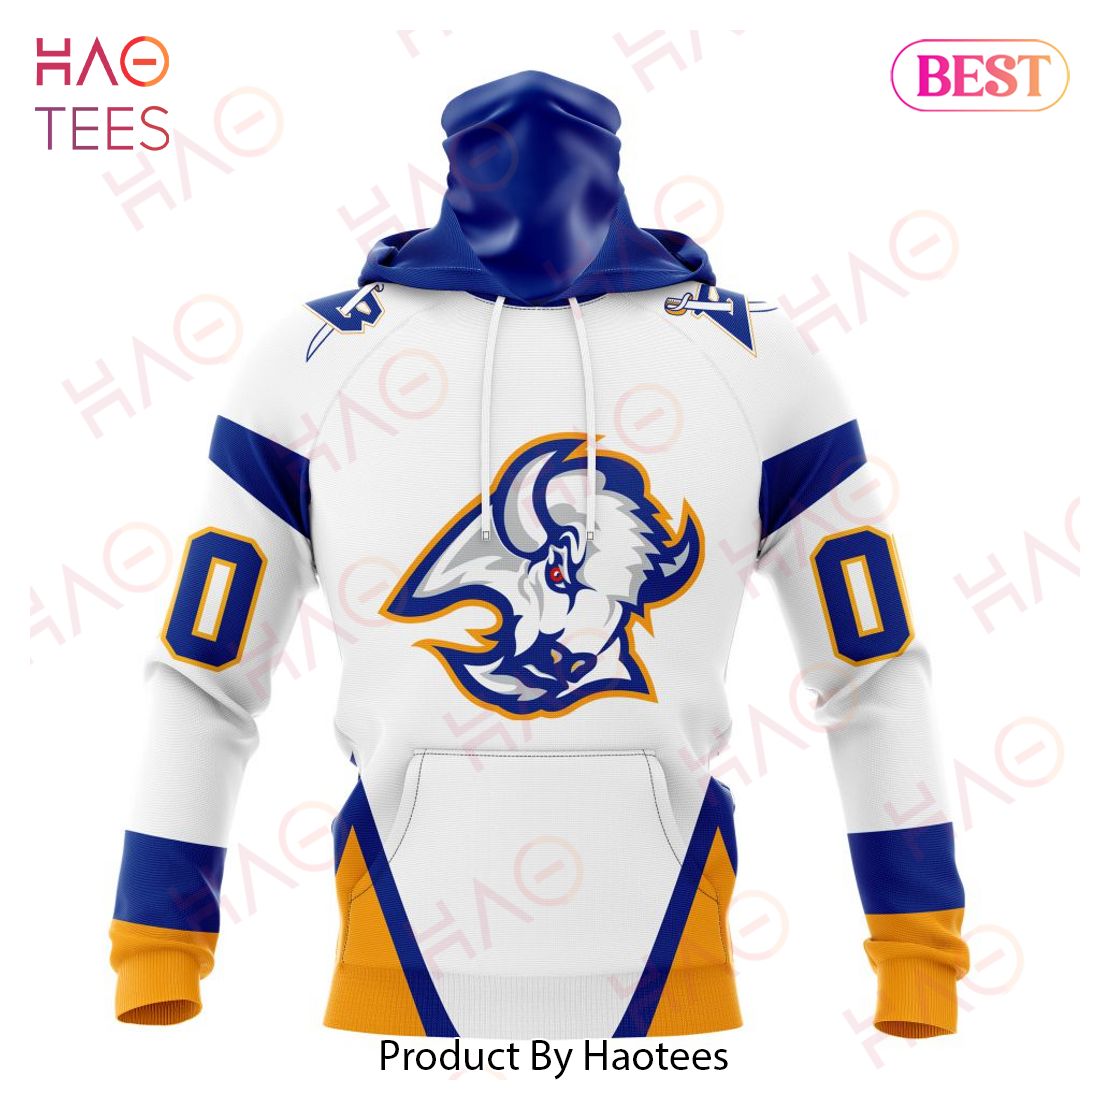 BEST NHL Buffalo Sabres Special Reverse Retro Redesign 3D Hoodie